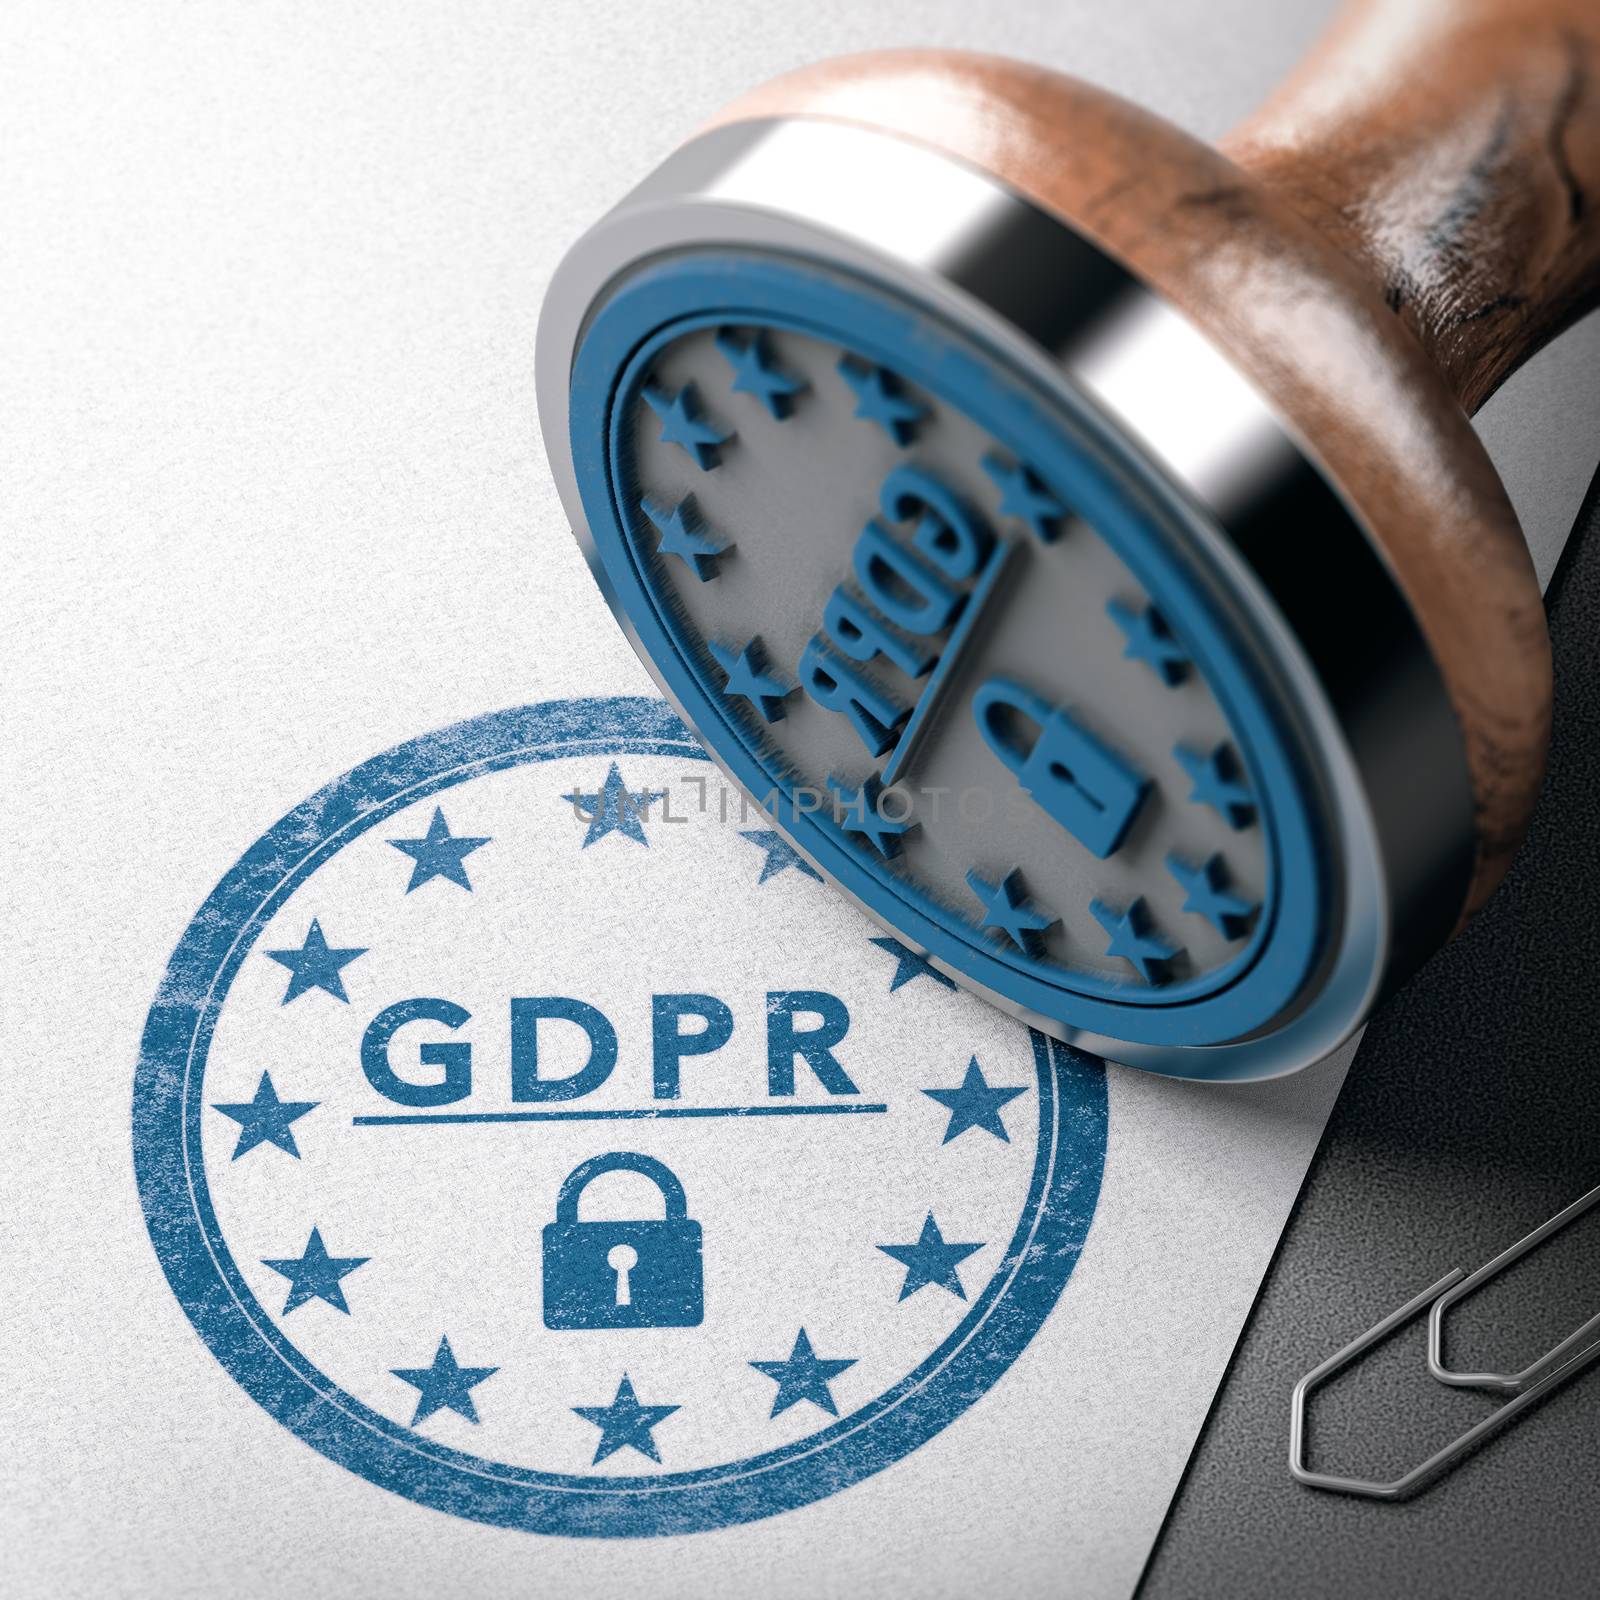 DPM, GDPR label, EU General Data Protection Regulation complianc by Olivier-Le-Moal